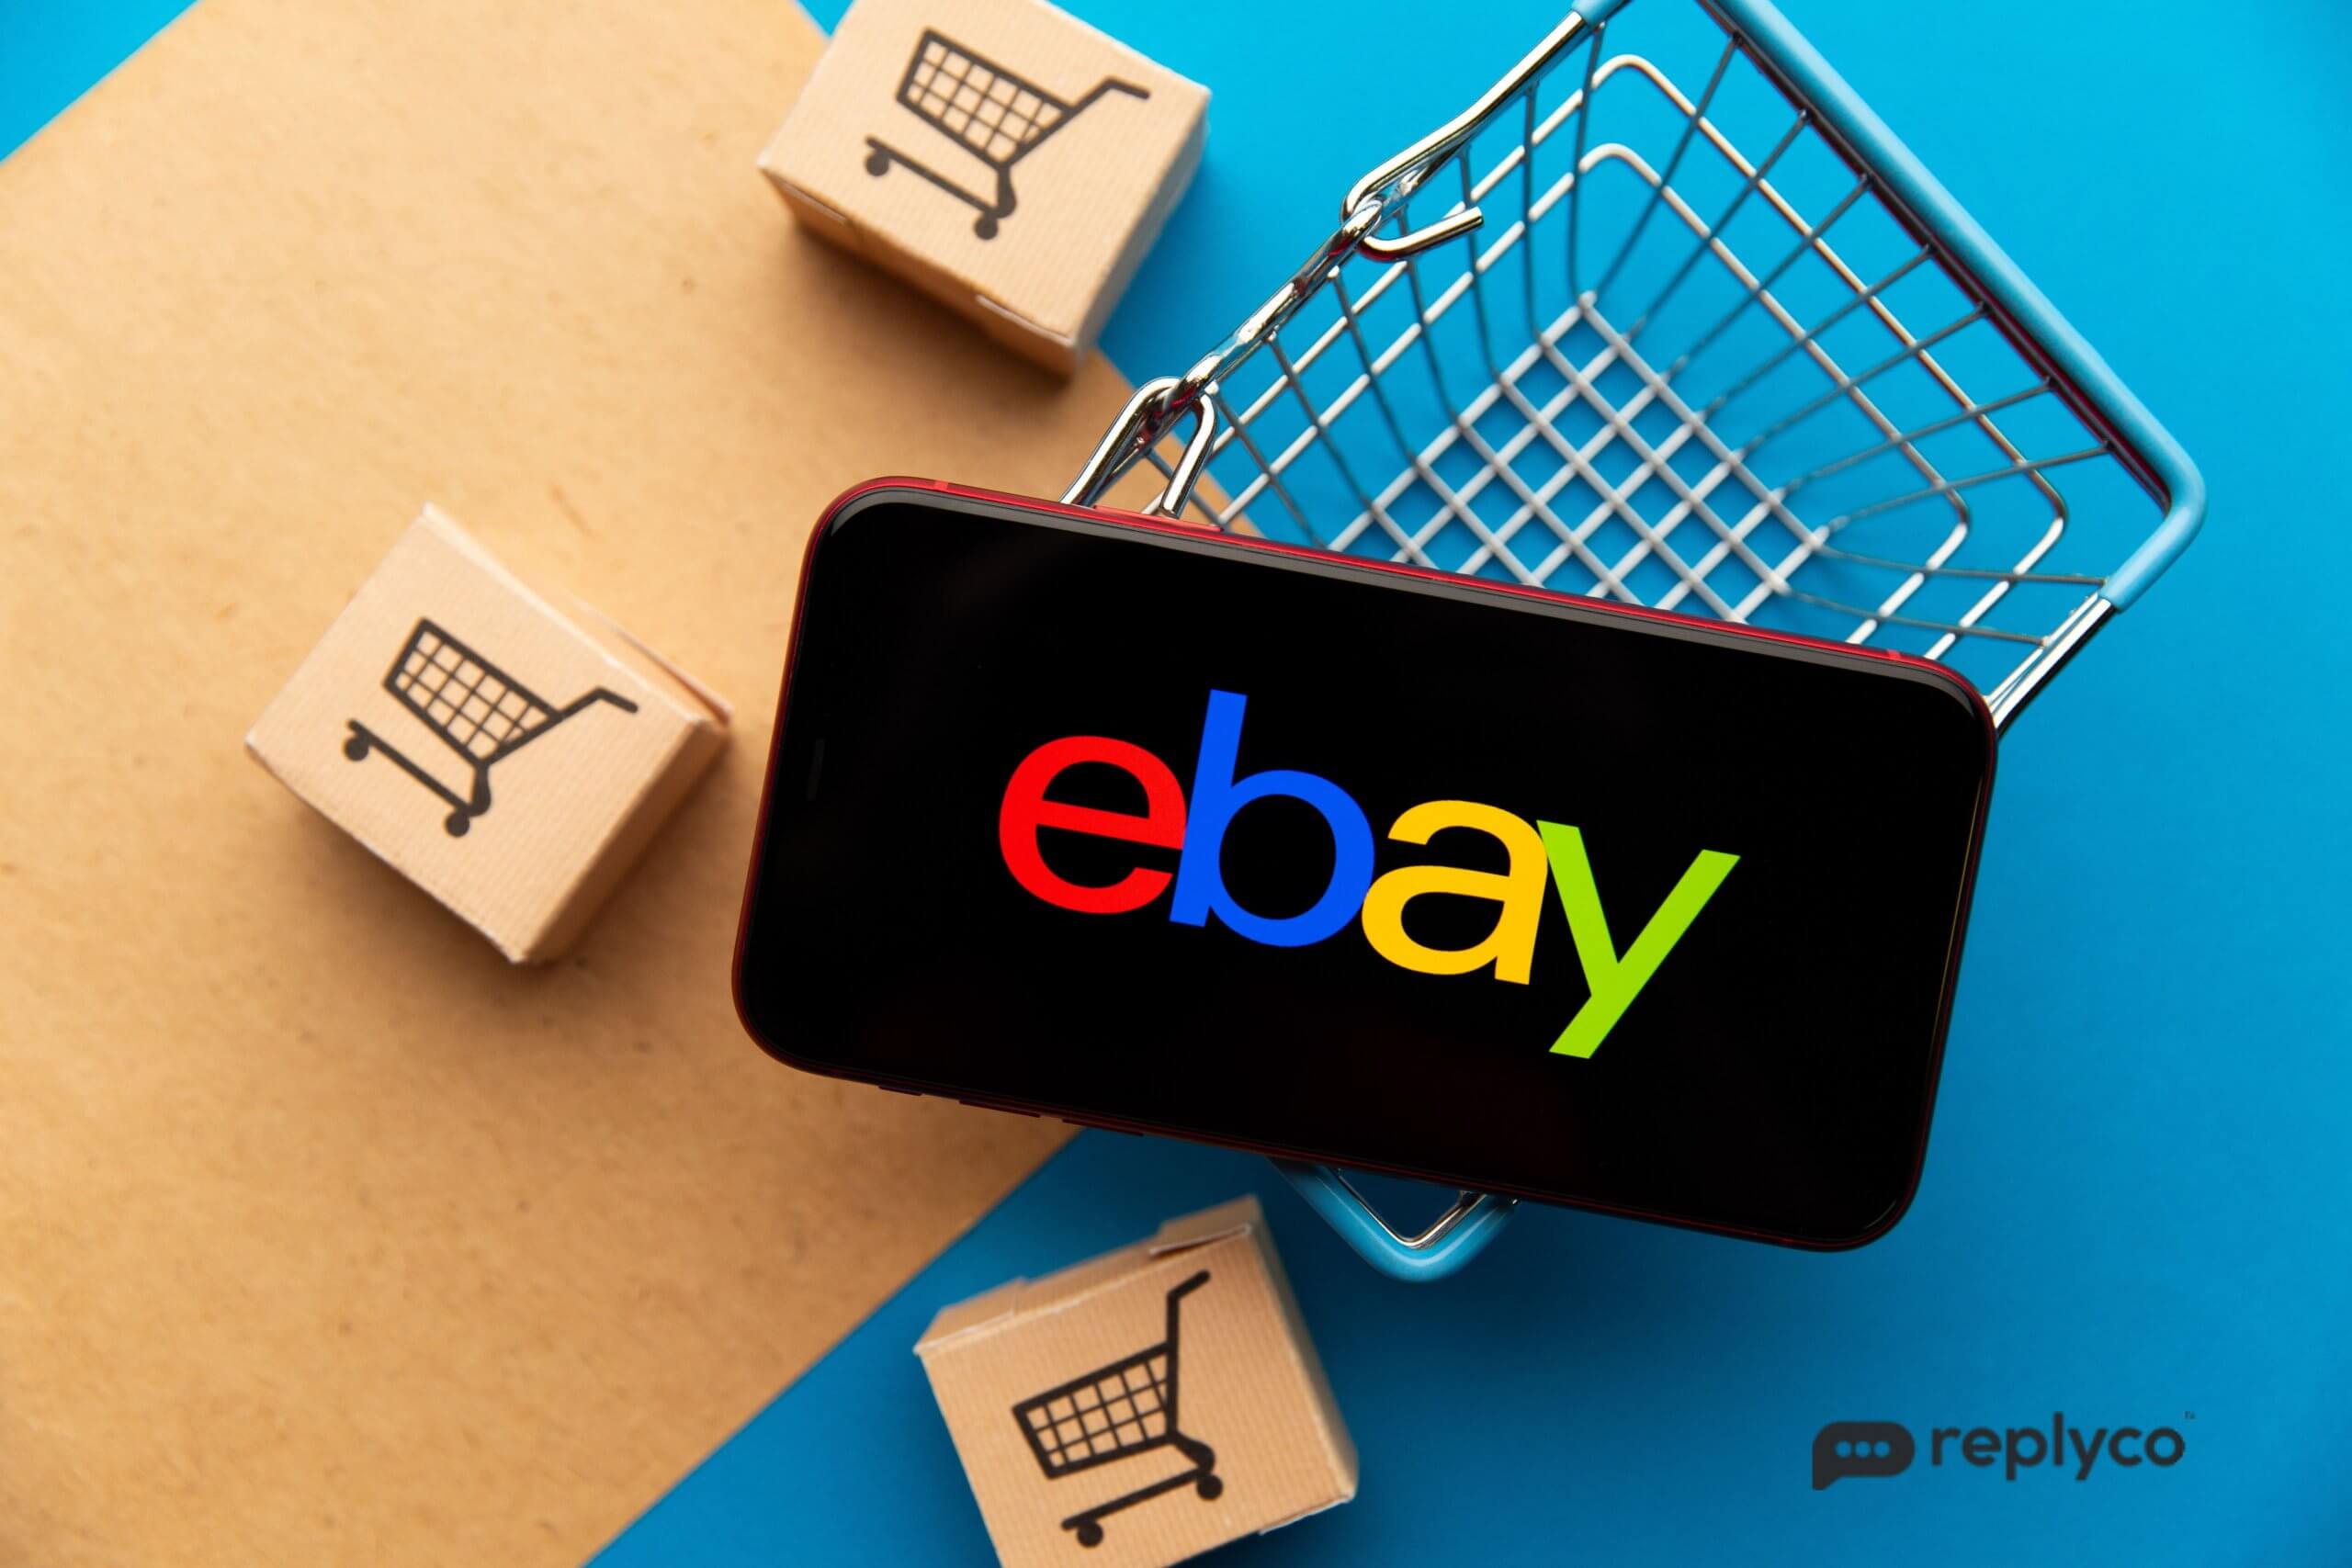 Are eBay promoted listings worth the cost? - Replyco Helpdesk Software for eCommerce